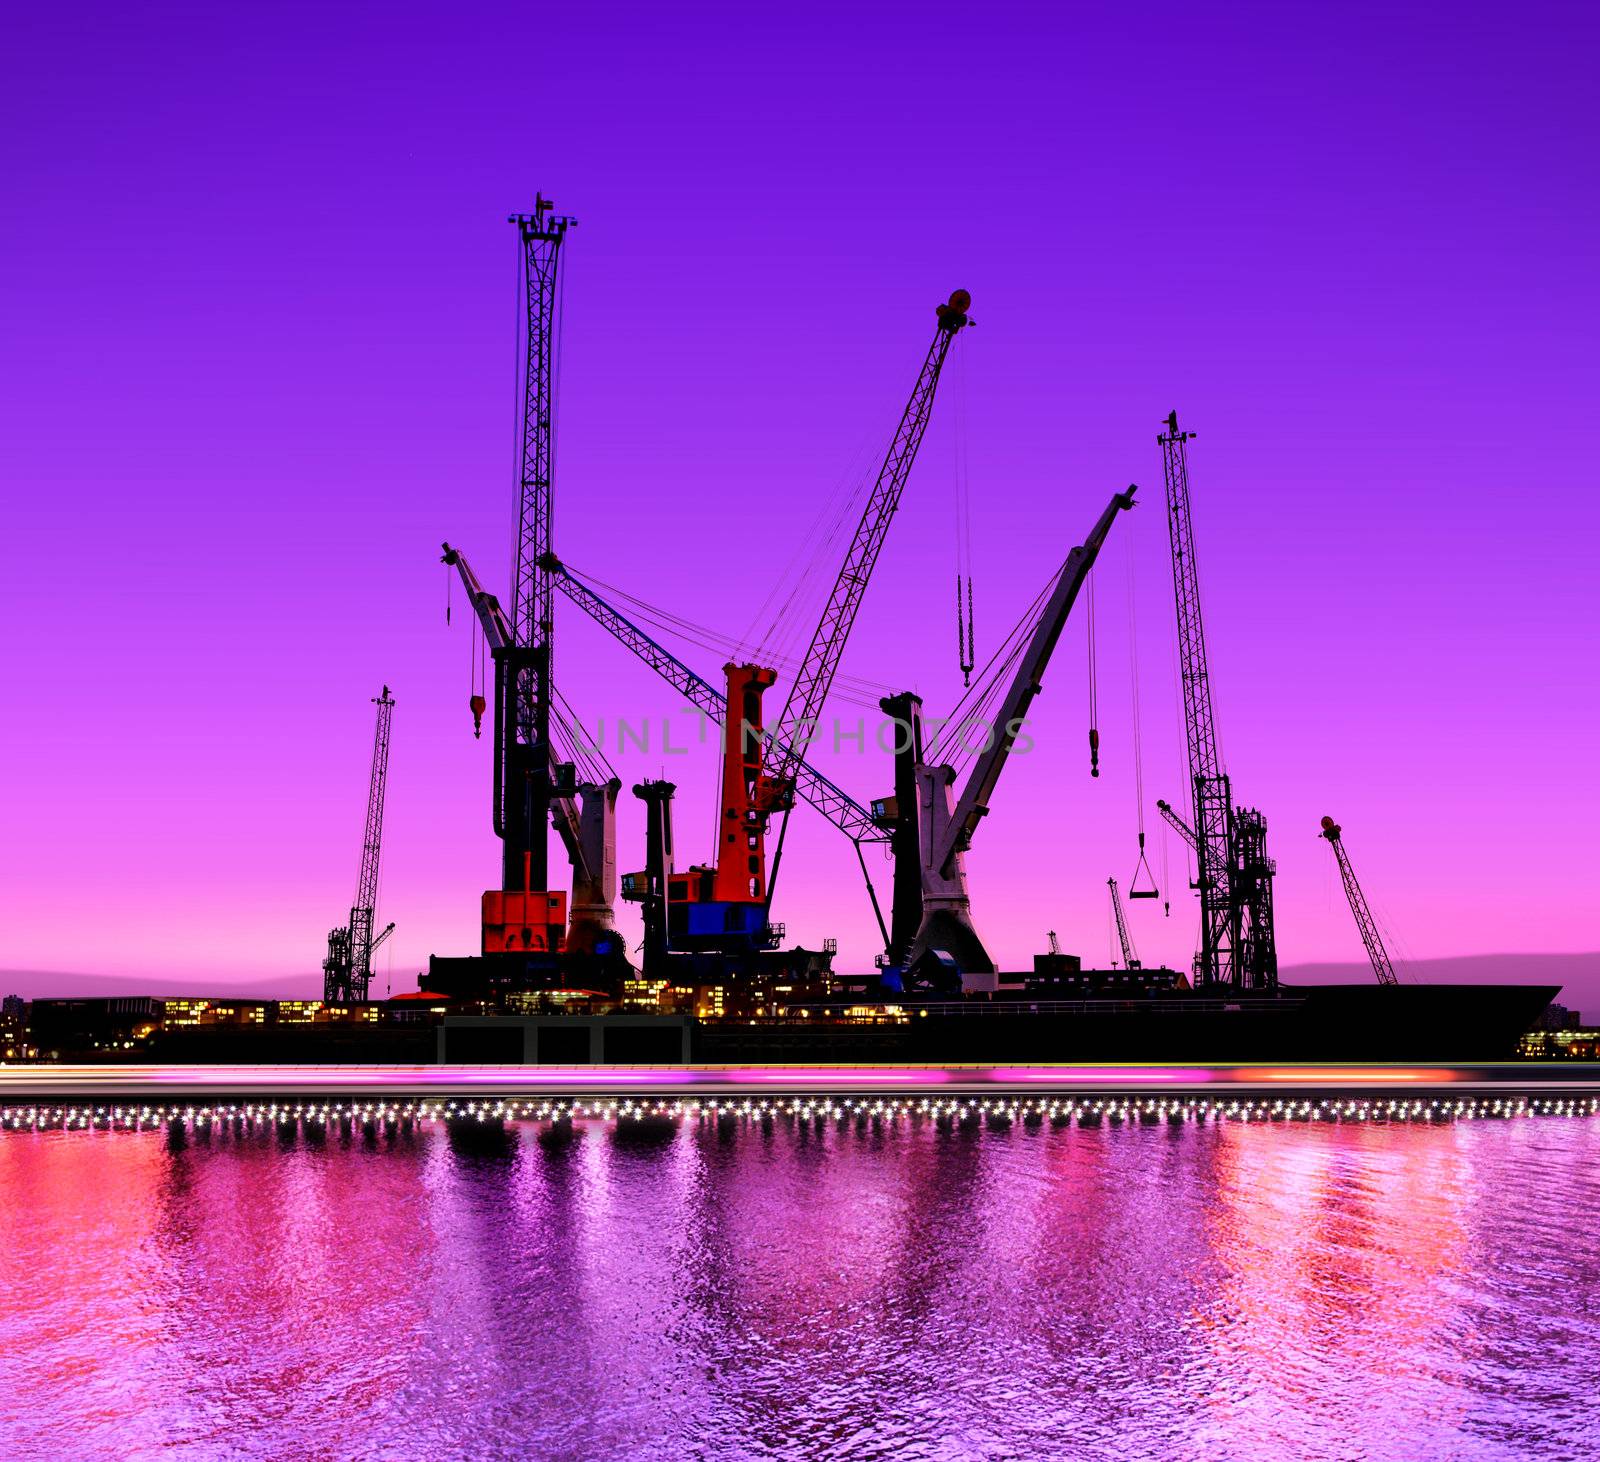 urban night view of the shipyards with cranes